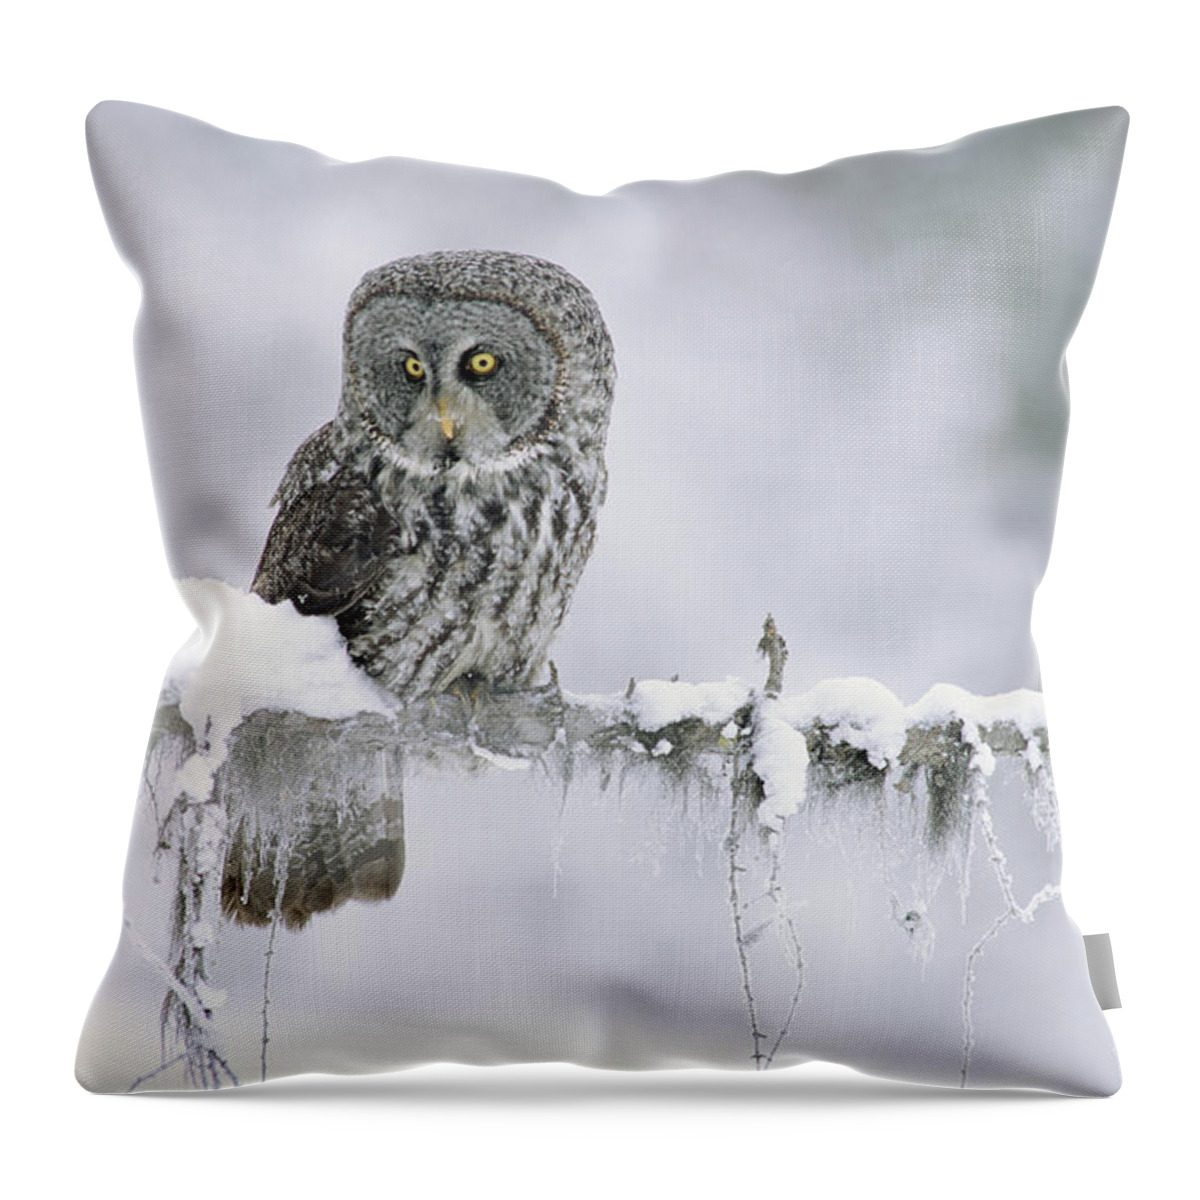 00170496 Throw Pillow featuring the photograph Great Gray Owl Perching On A Snow by Tim Fitzharris